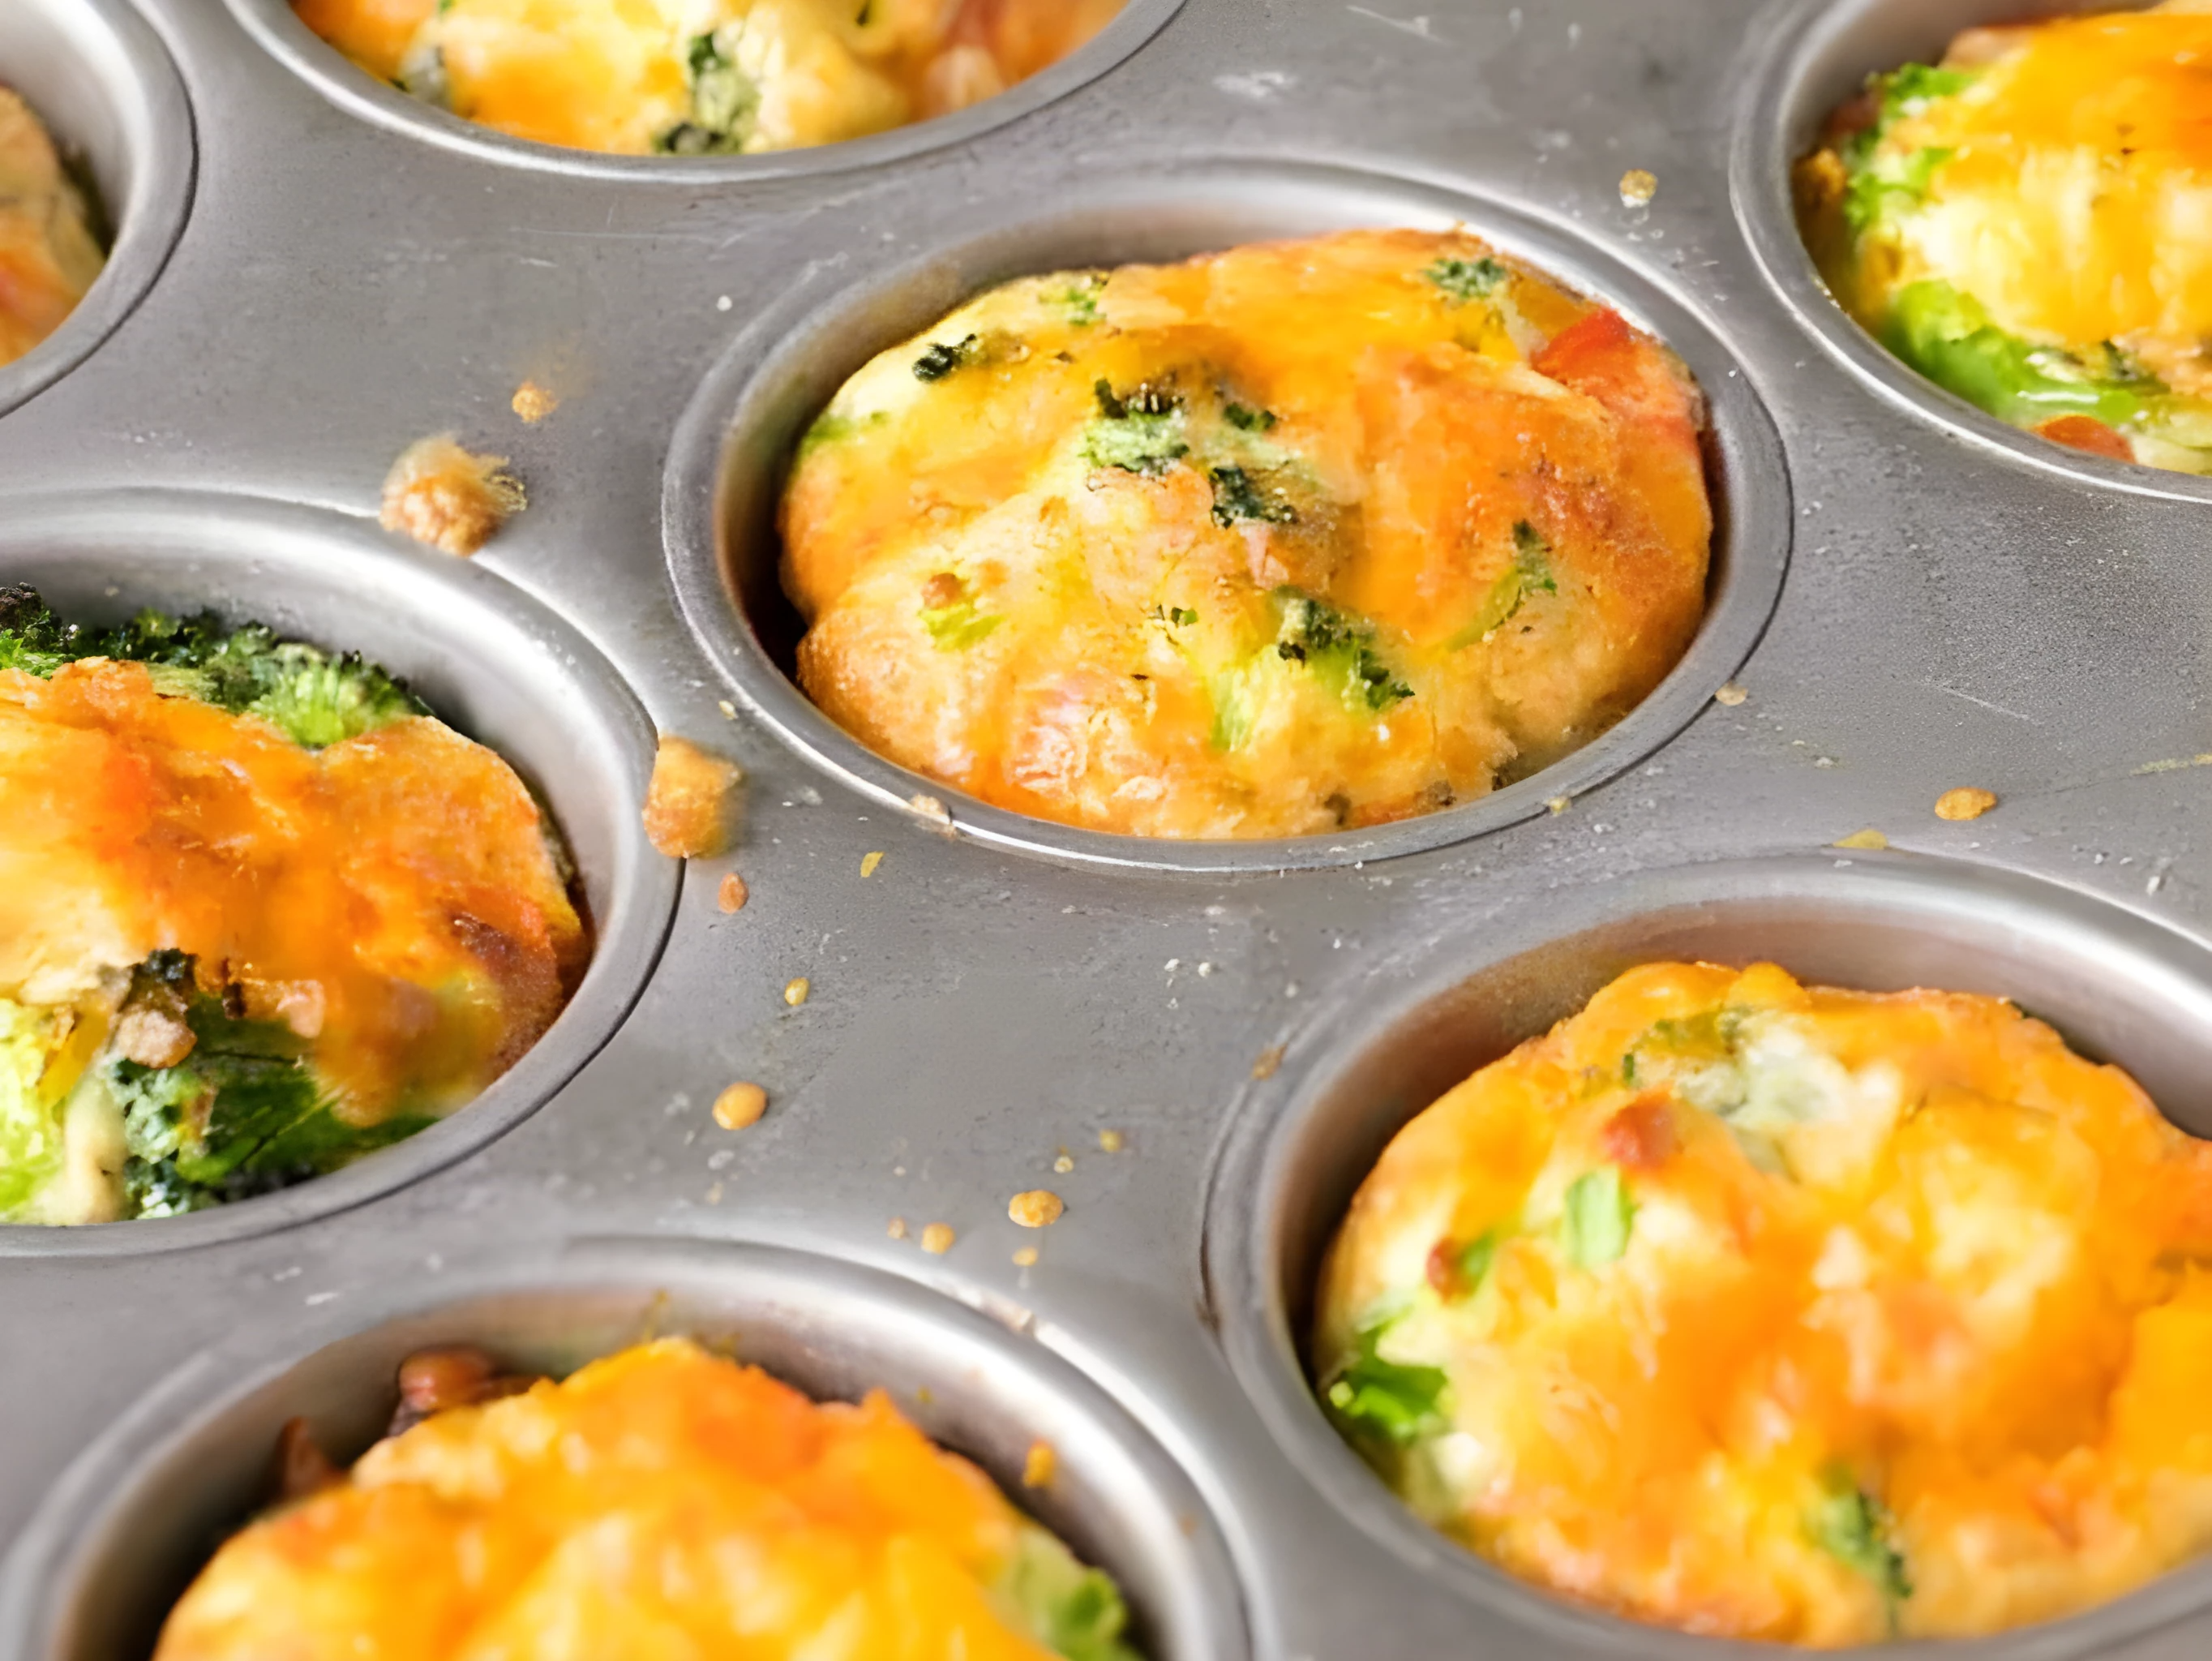 Low-Carb Breakfast, Egg Muffins, Courtesy of Spend with Pennies